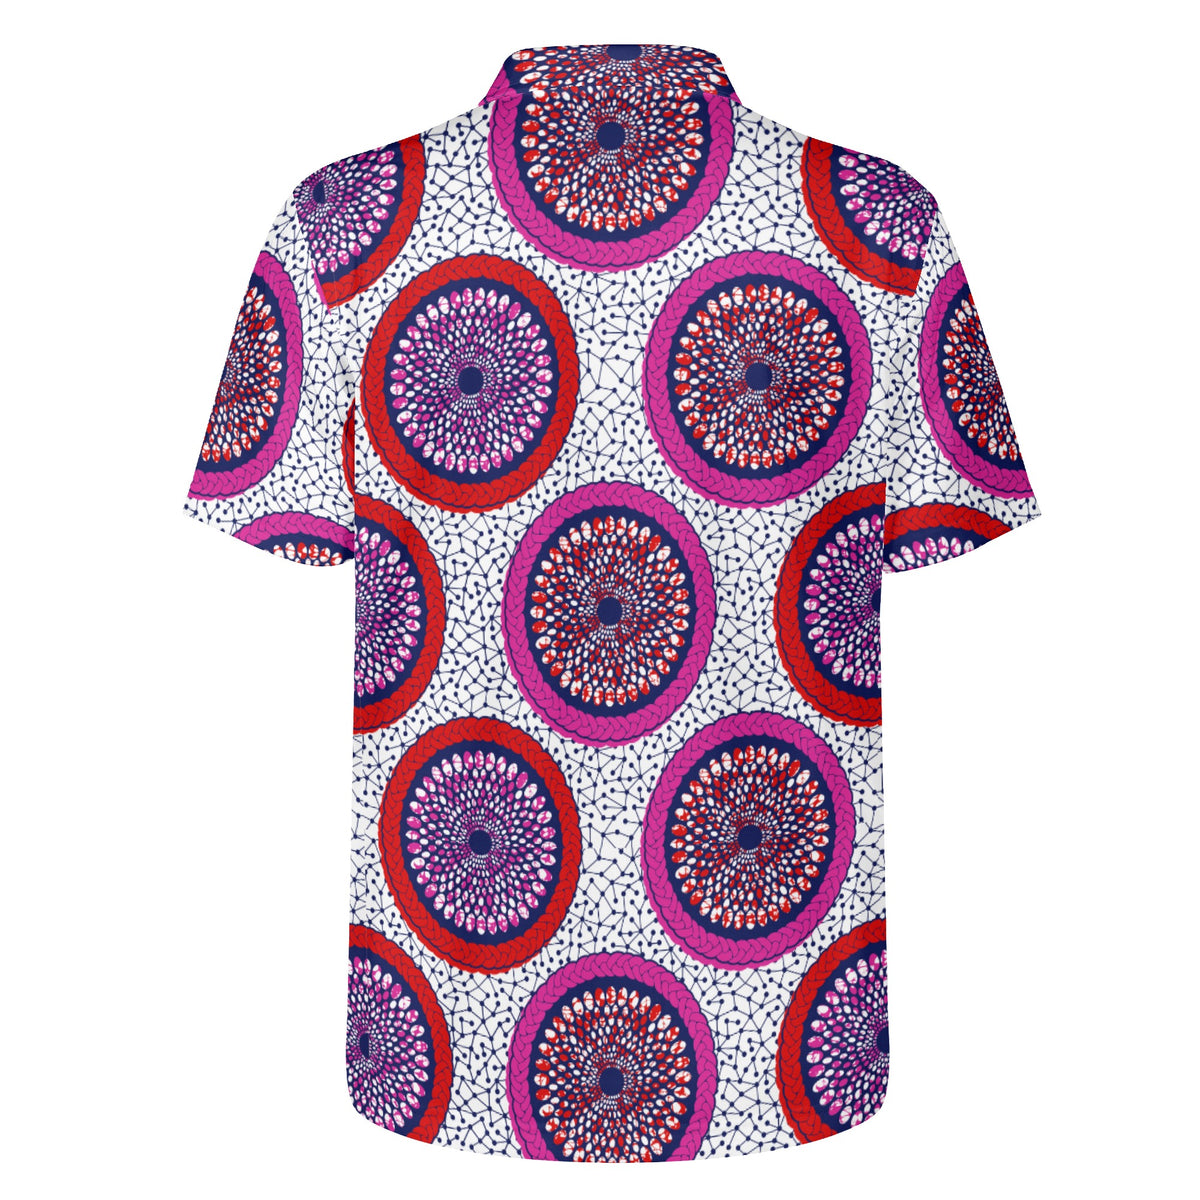 Midnight Blue Polo Shirt with African Ankara prints in vibrant colors Sumbu_African_Prints_and_Designs